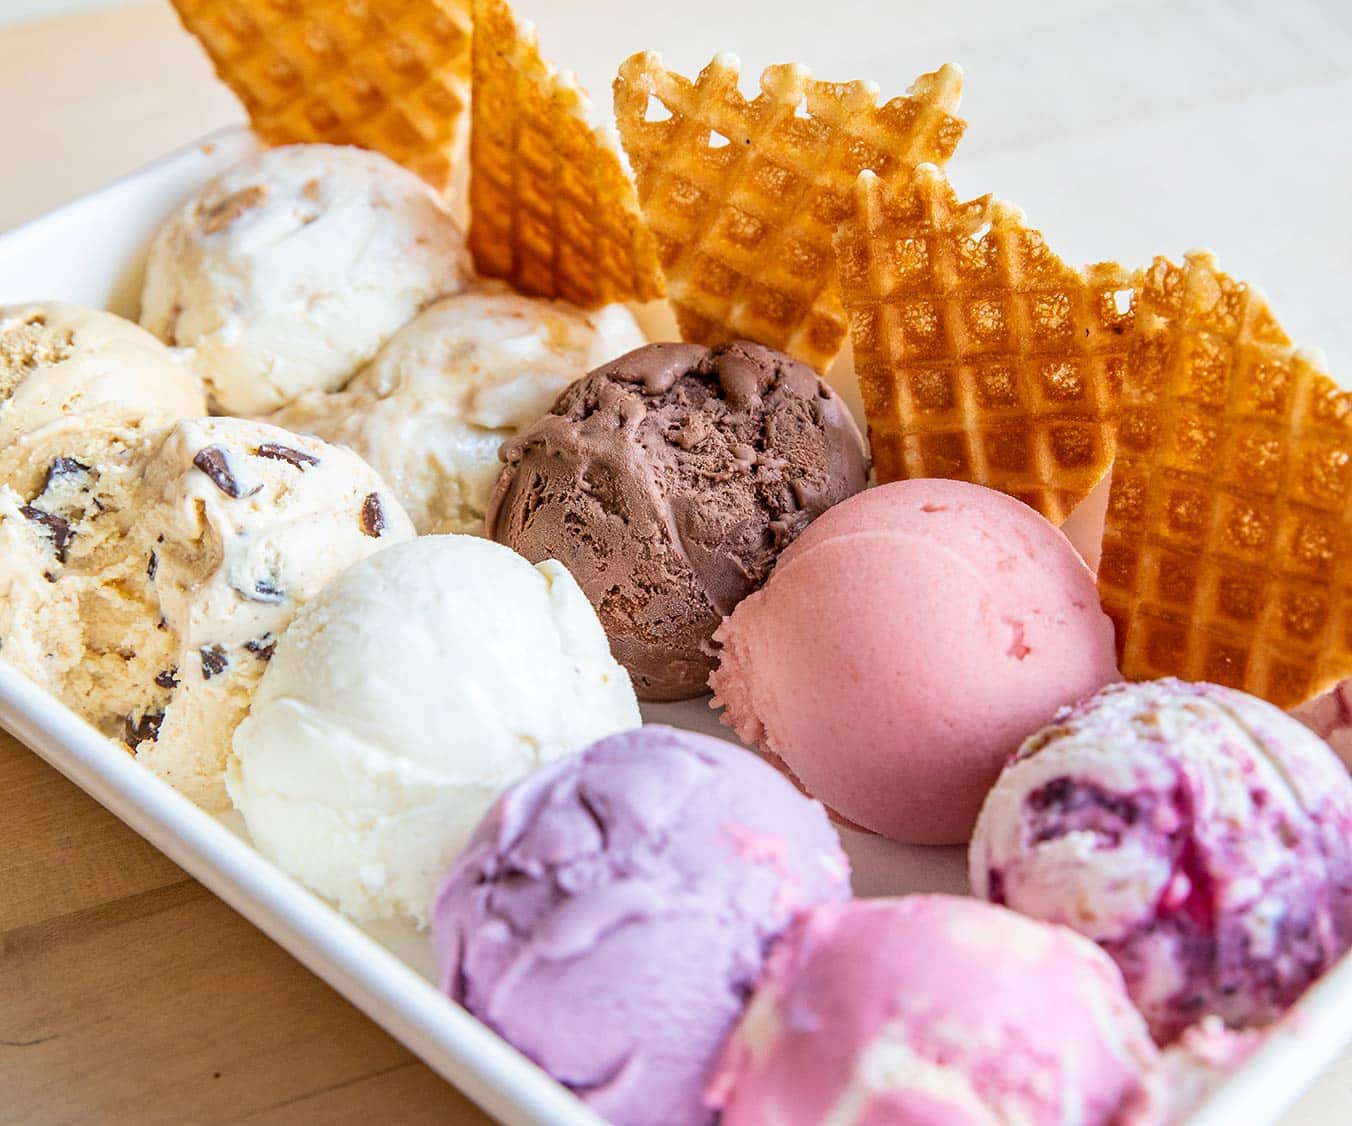 A plate full of ice cream scoops and waffle cones.